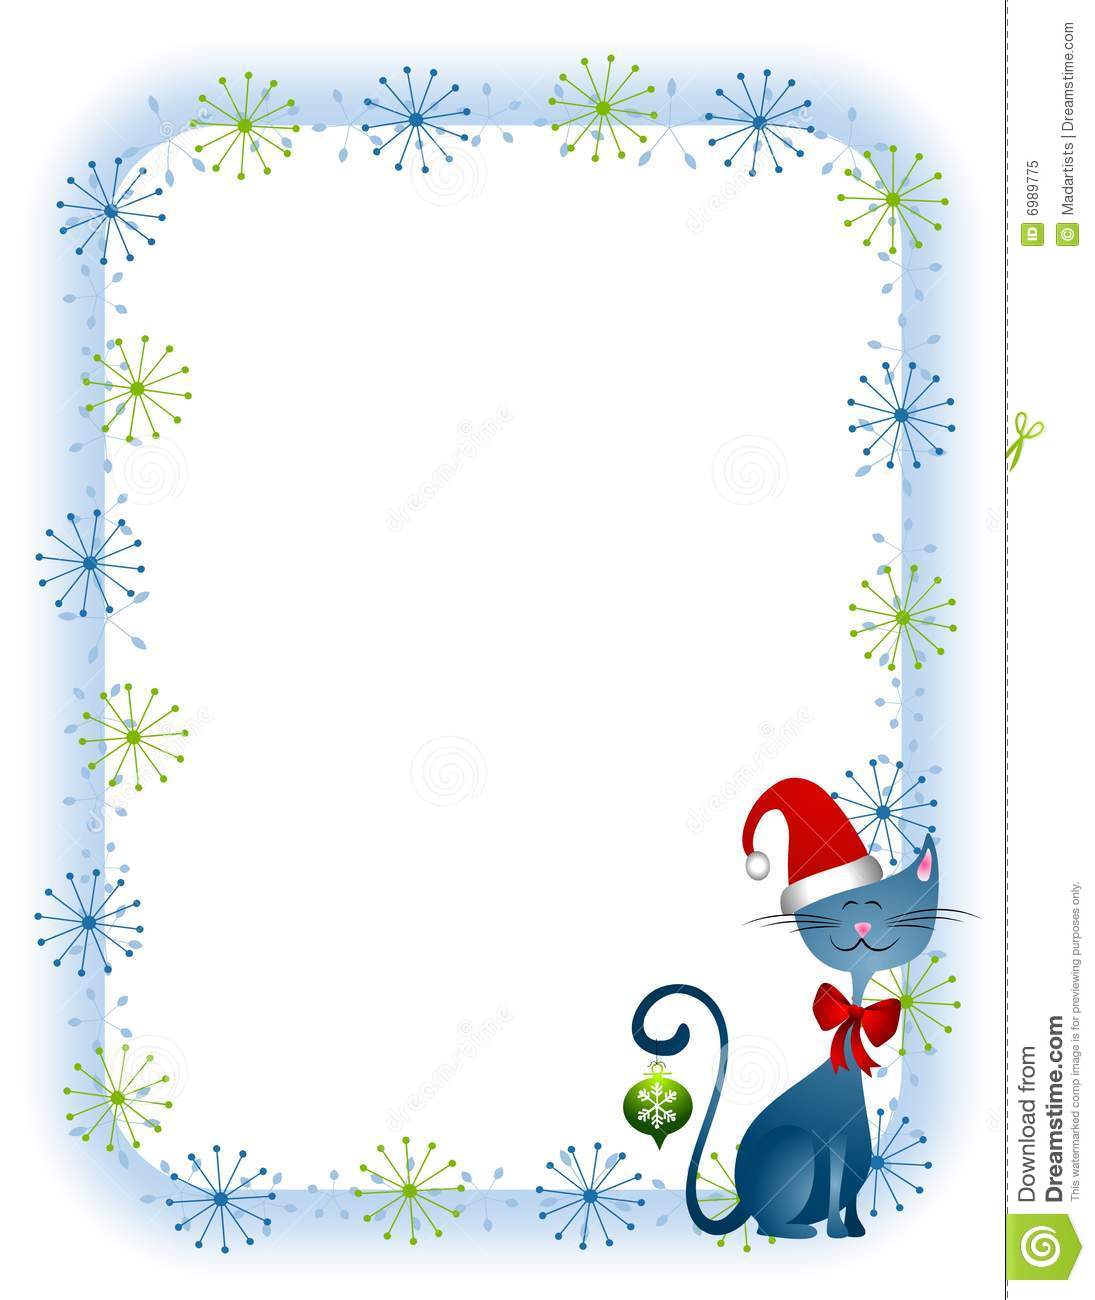 Clip Art Illustration Featuring A Cute Cat Wearing Santa Hat With